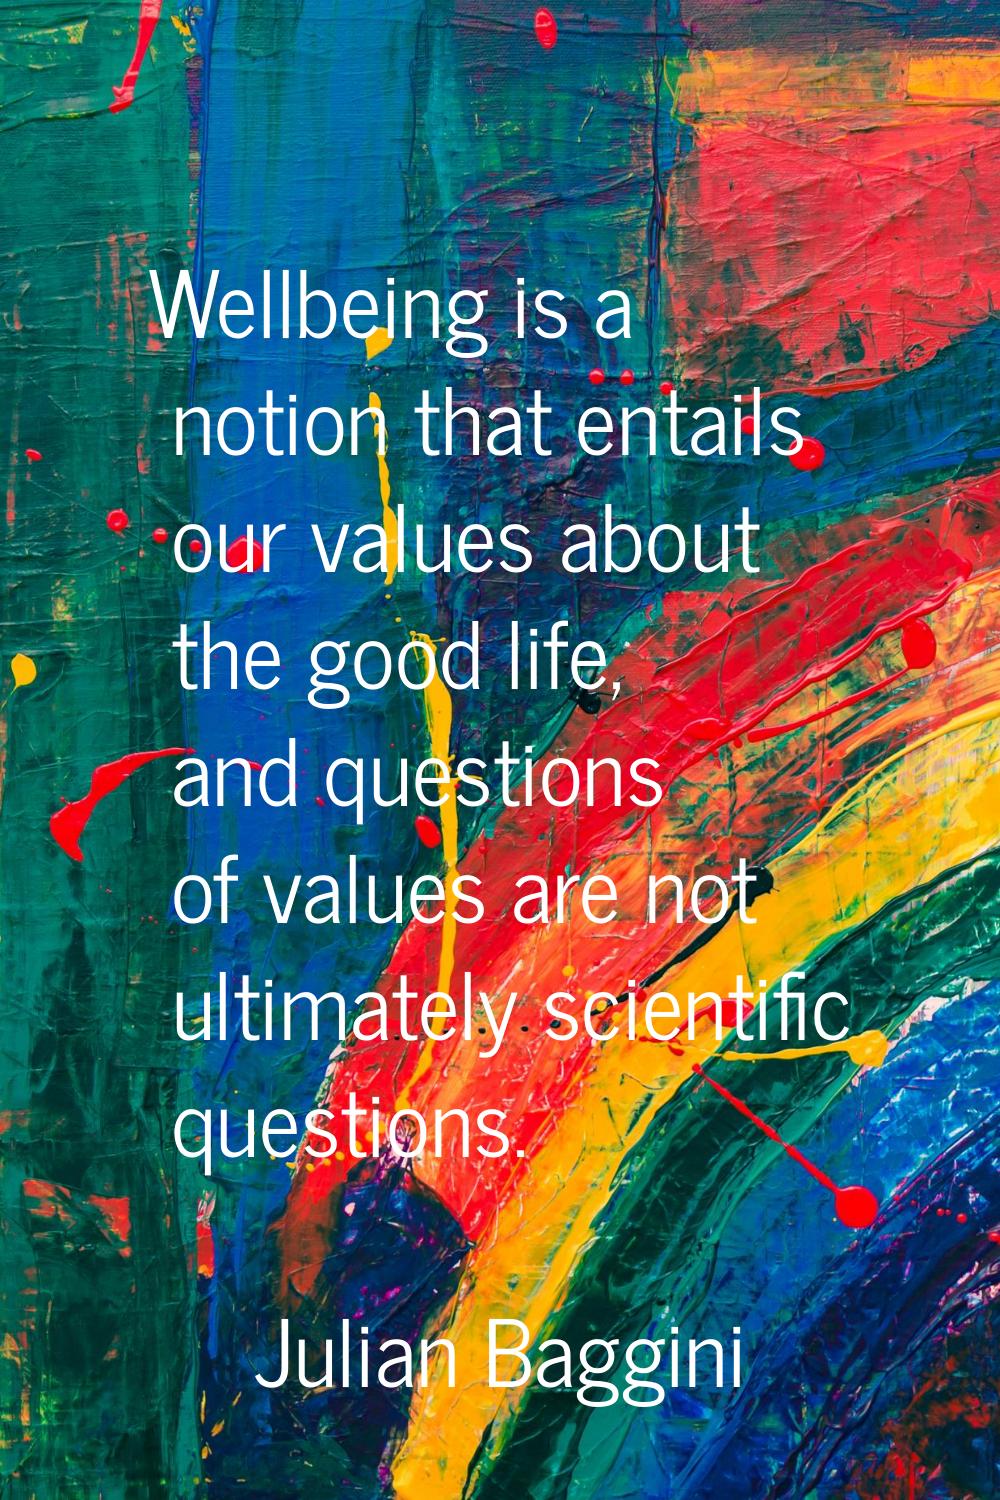 Wellbeing is a notion that entails our values about the good life, and questions of values are not 